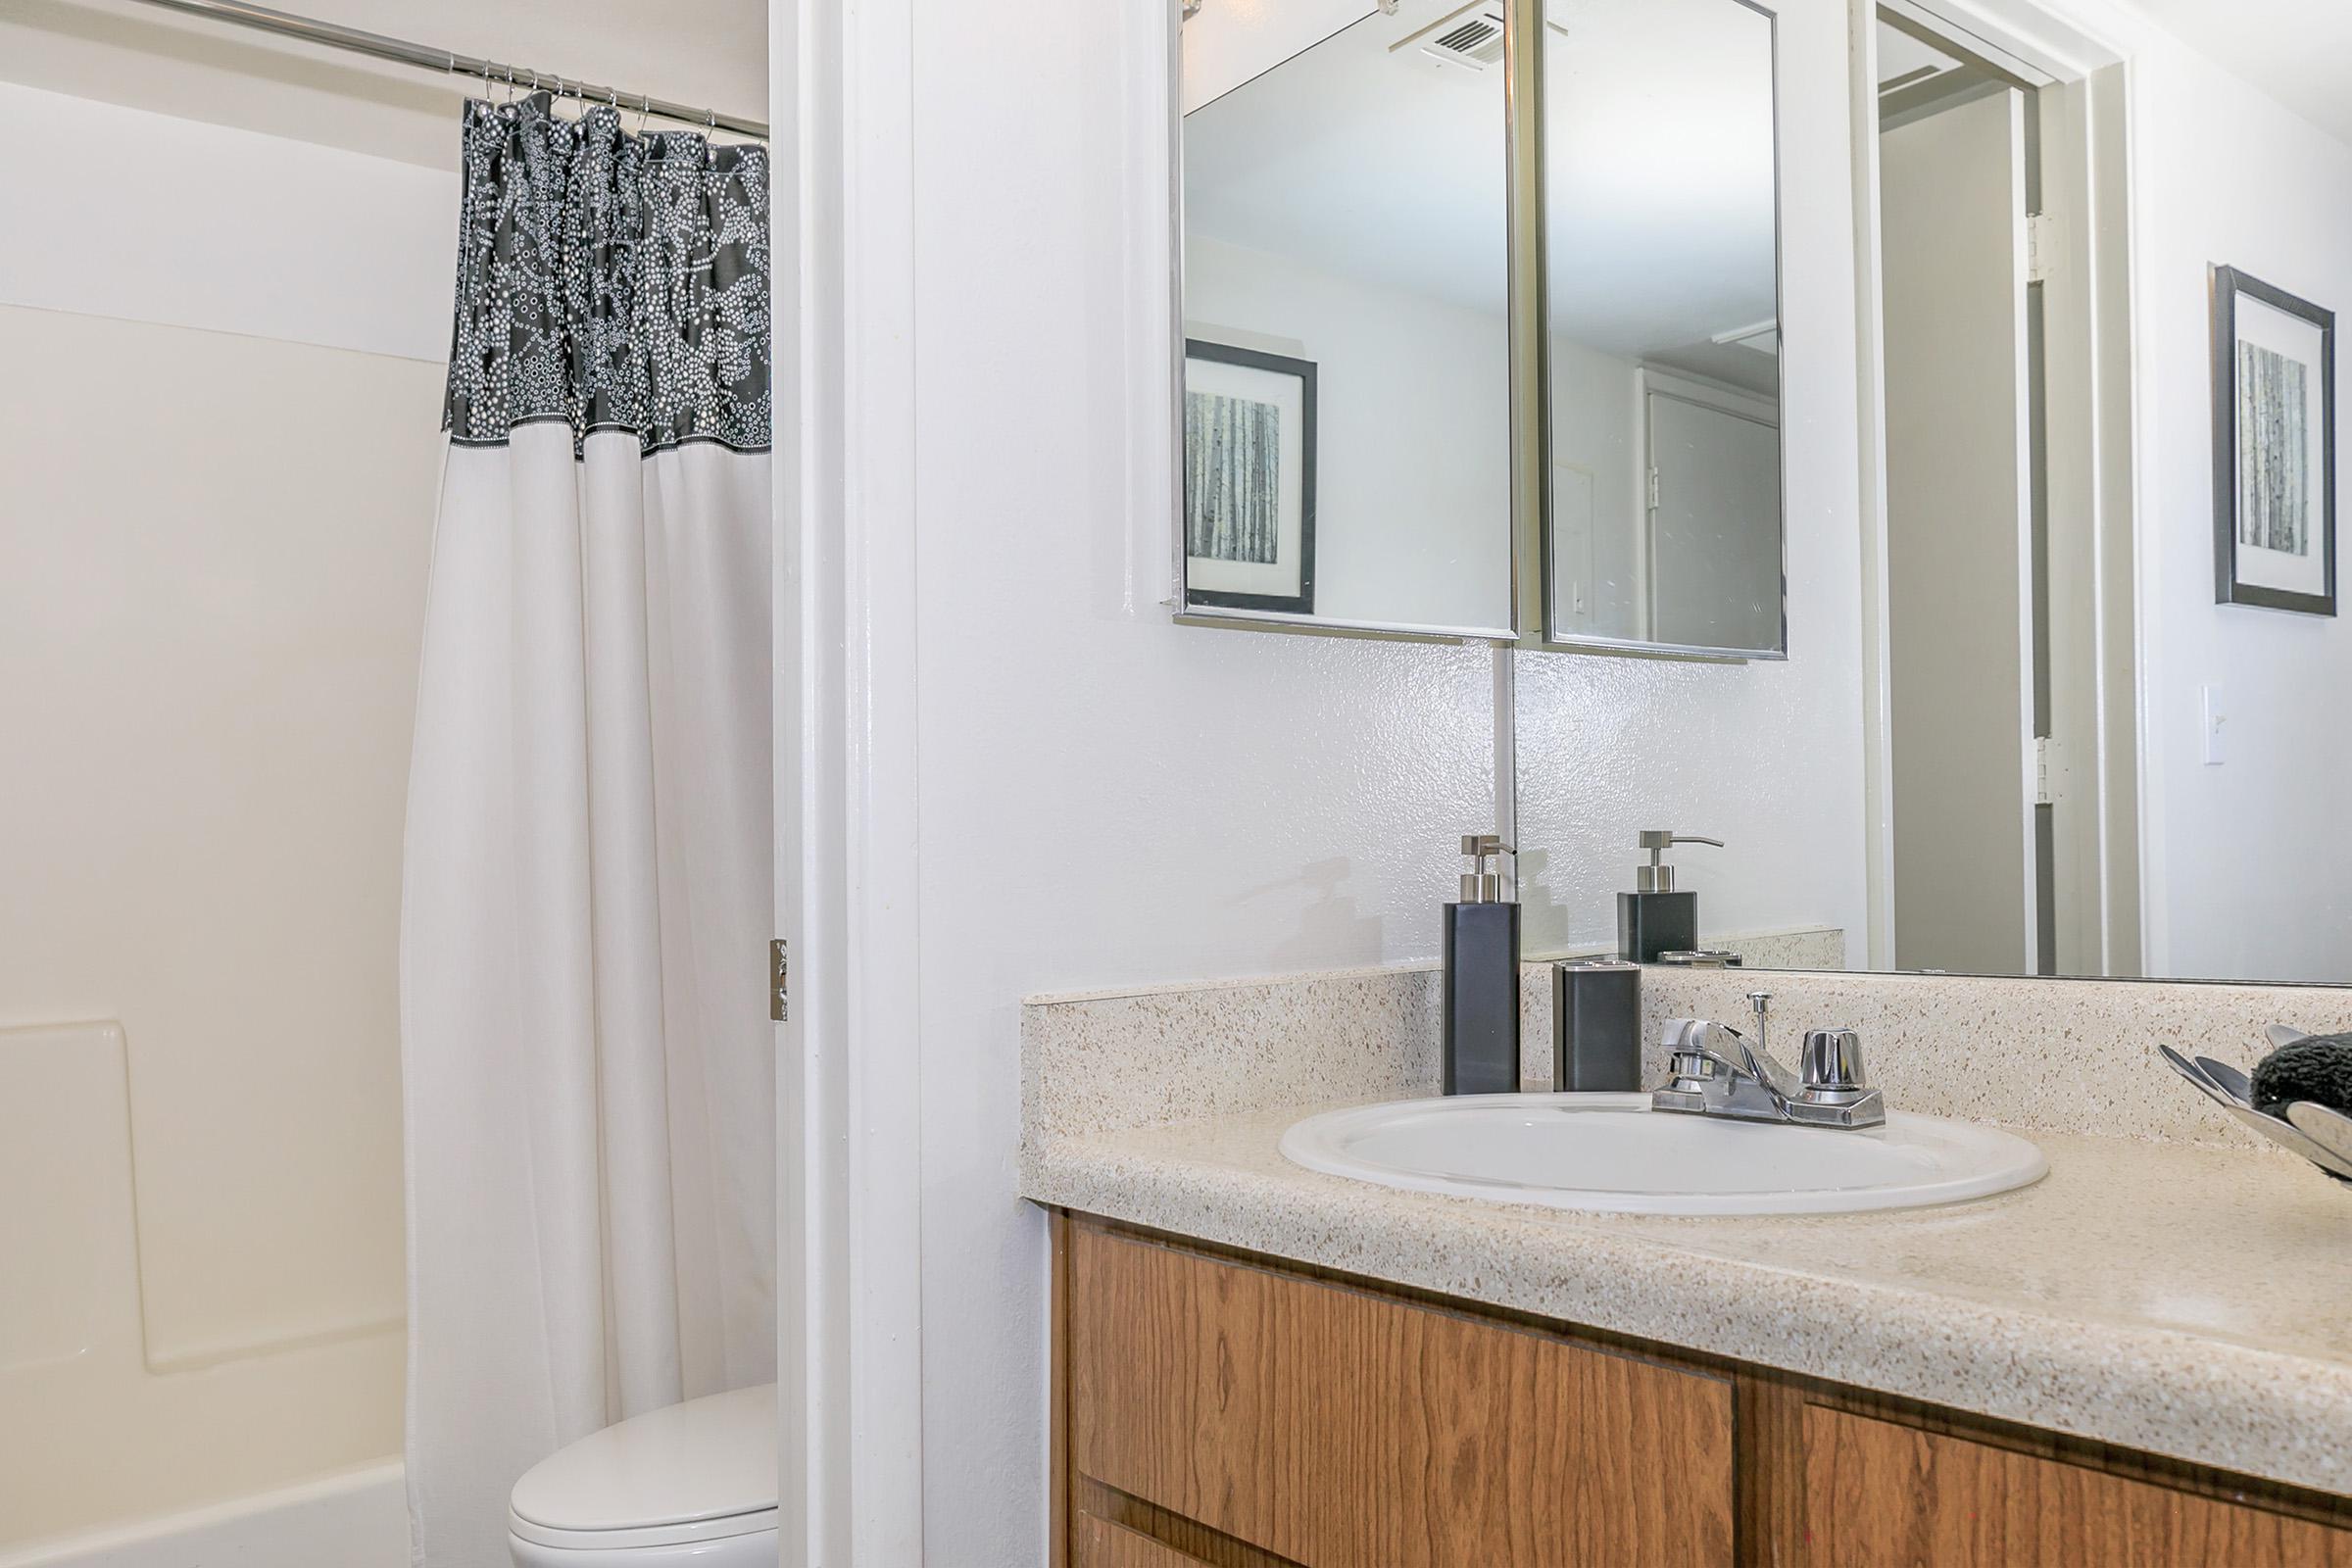 A bathroom with a vanity, medicine cabinet and a shower at Rise North Ridge.